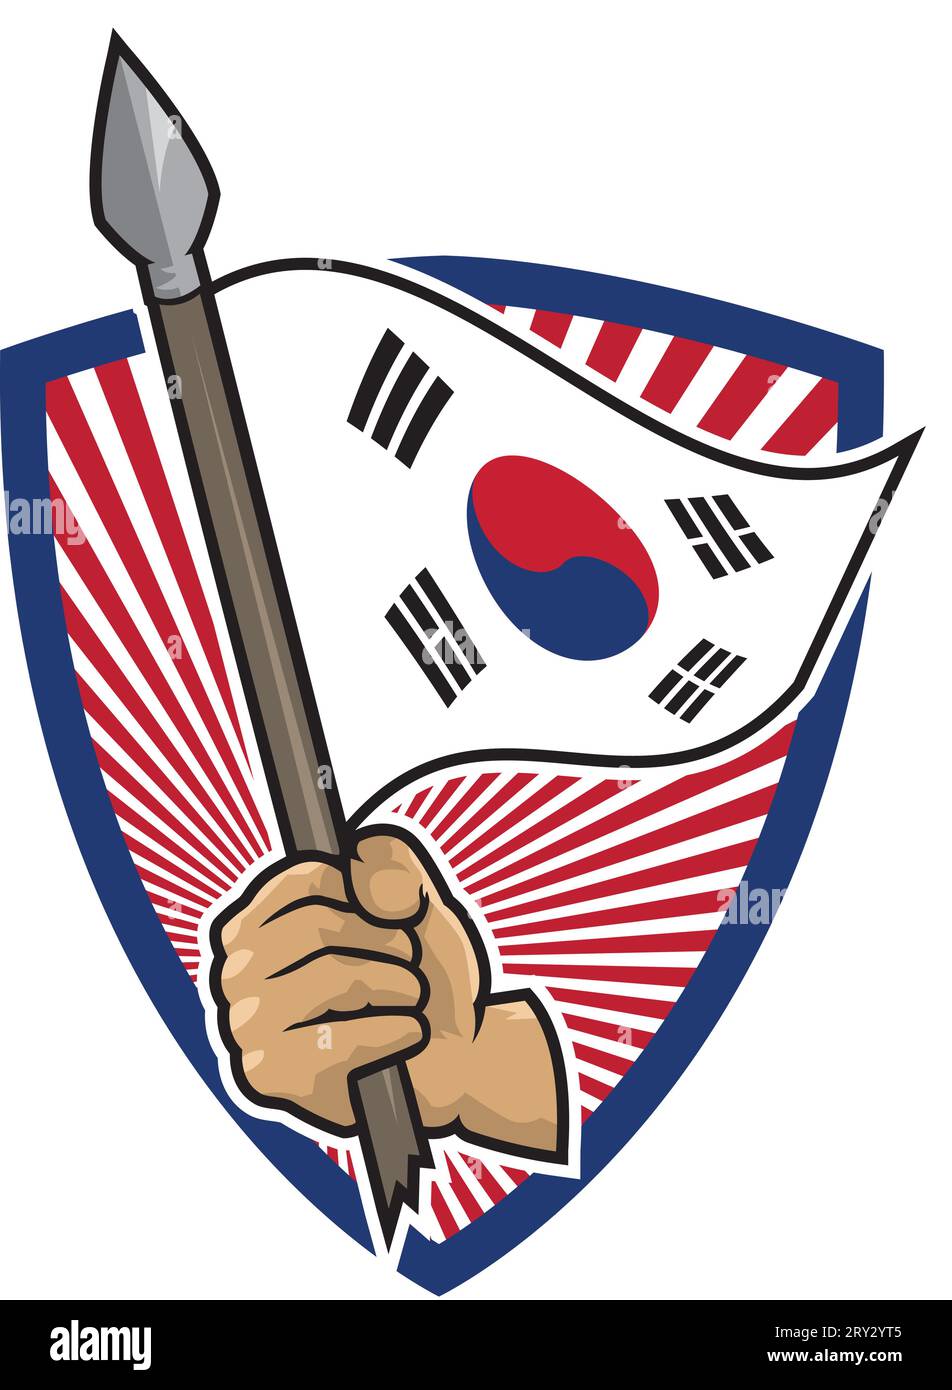 Illustration of an hand holding a spear with a waving (South) Korean flag. Shield in the background. Stock Vector